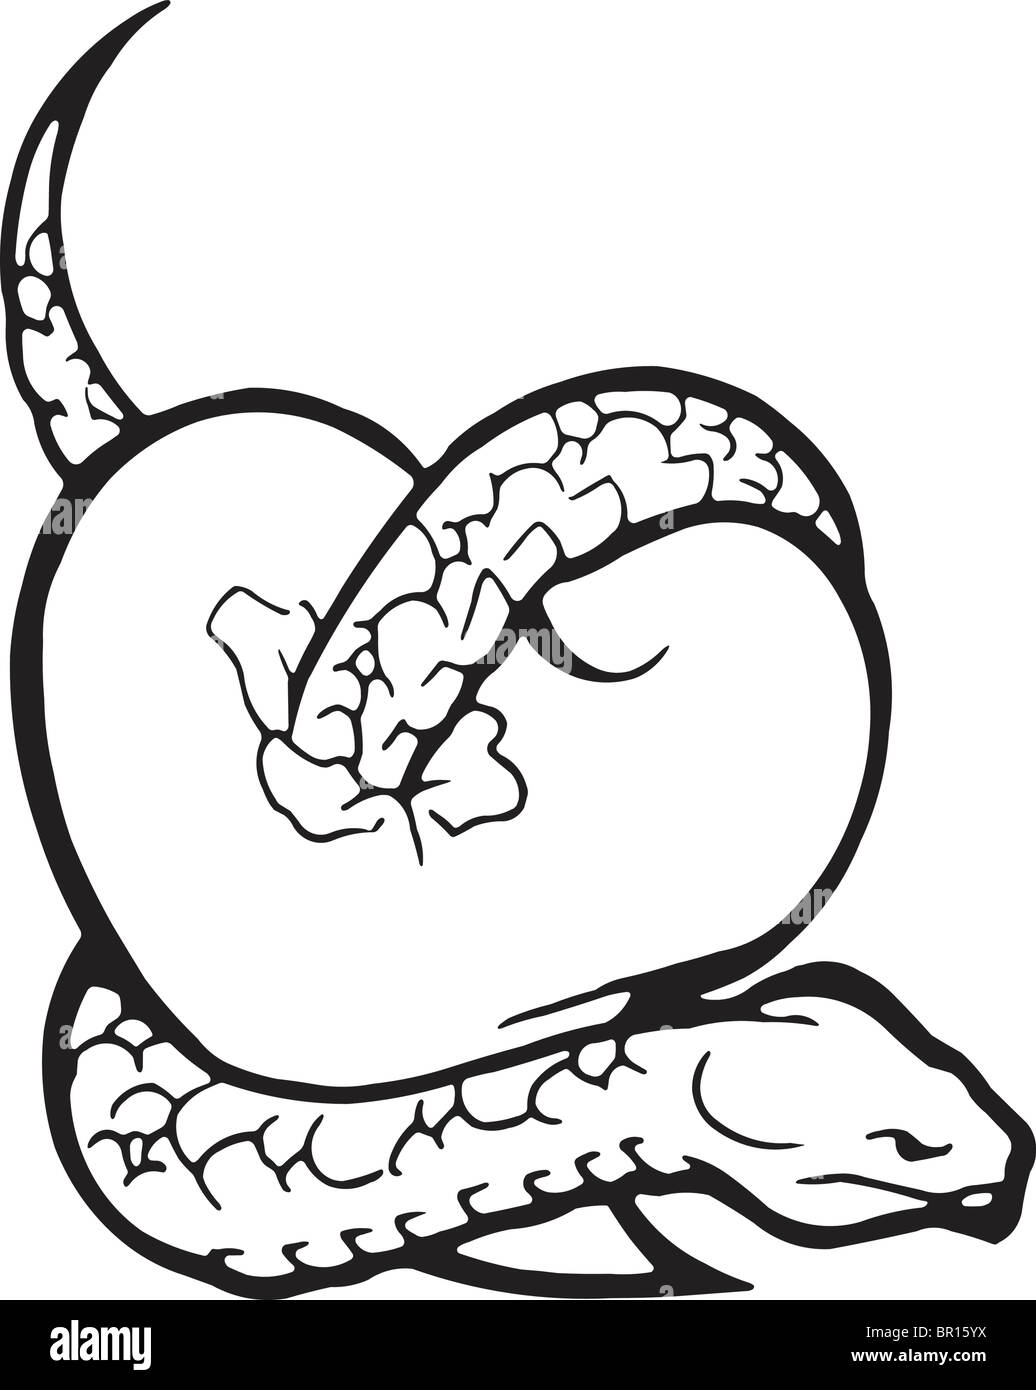 A black and white version of a heart with a snake wrapped around it Stock Photo